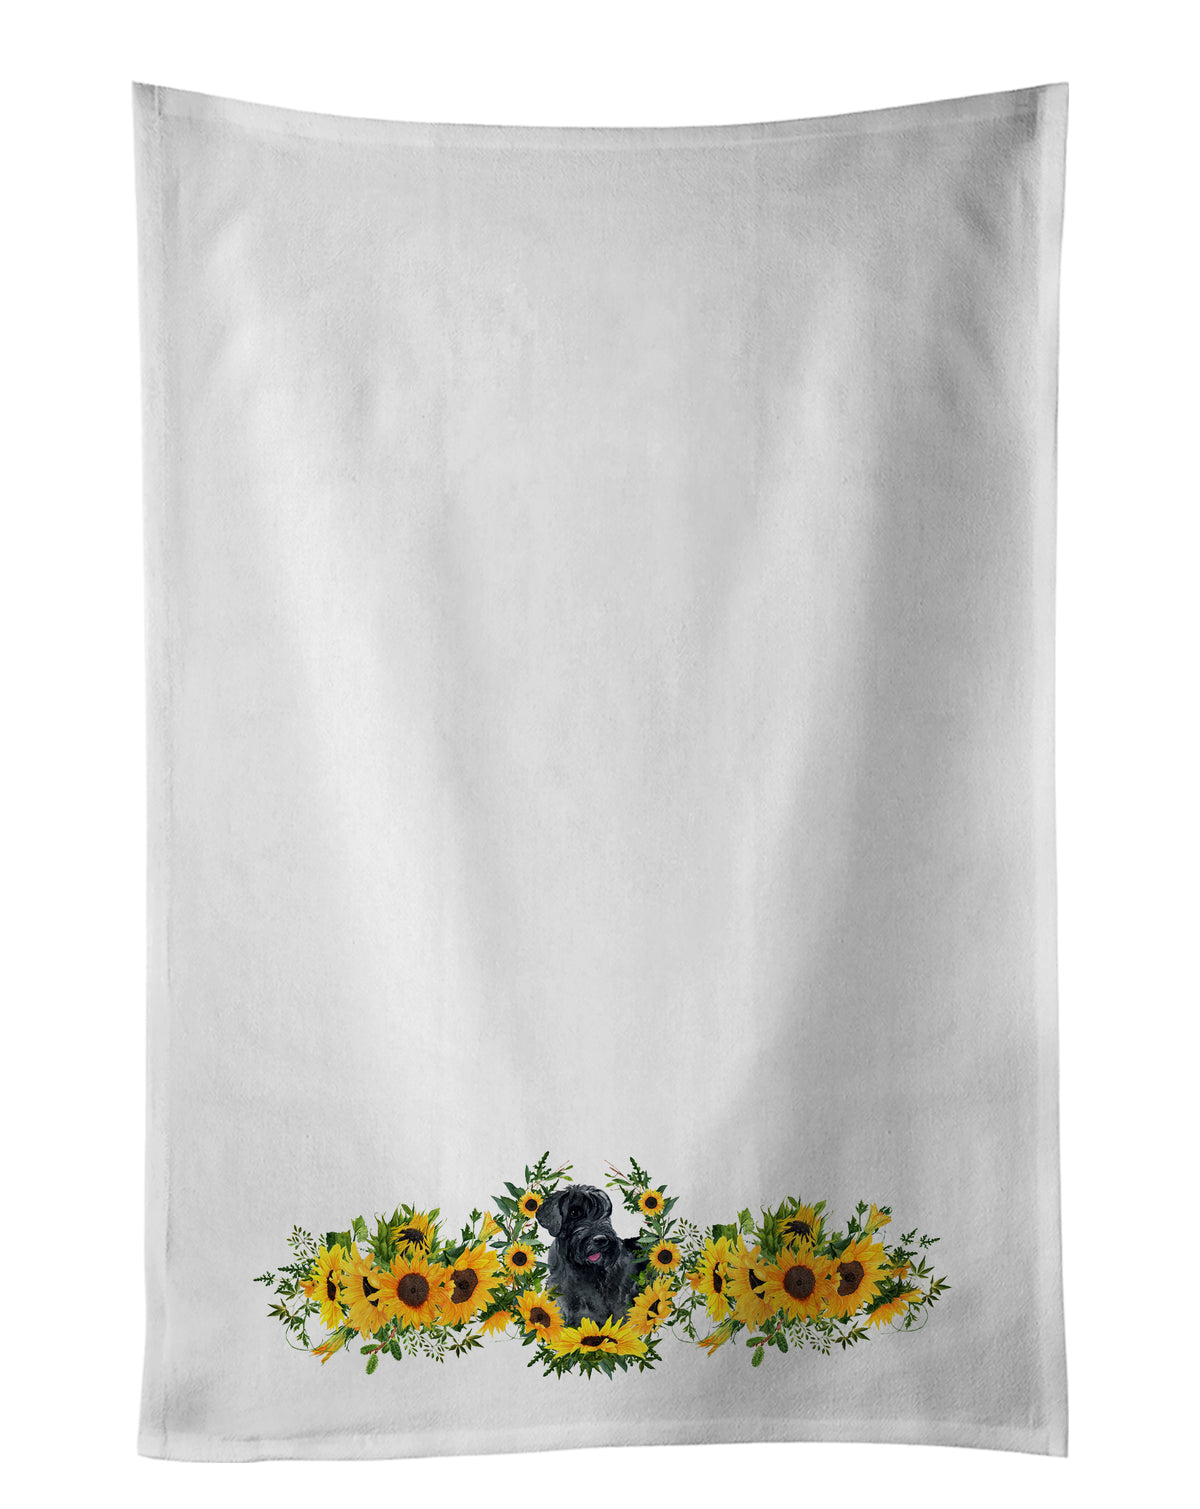 Buy this Giant Schnauzer in Sunflowers White Kitchen Towel Set of 2